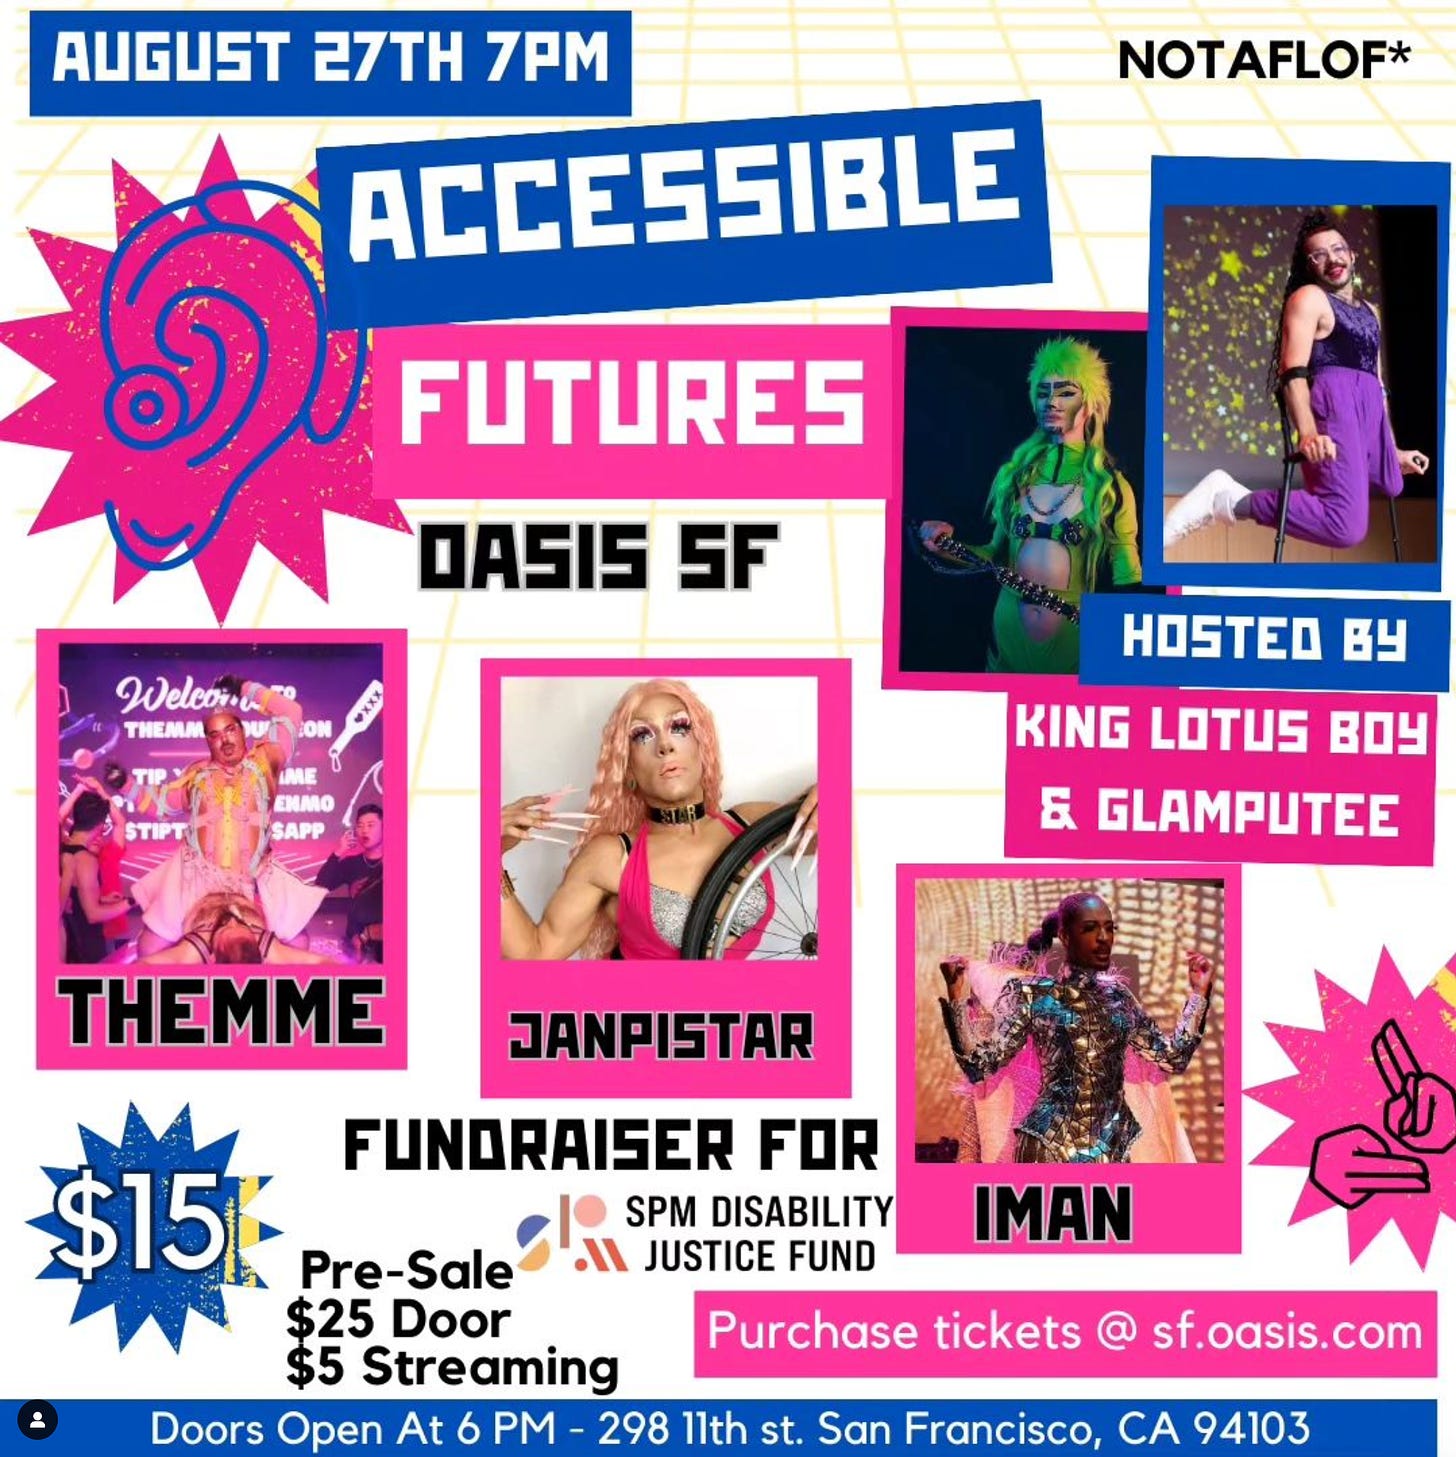 There is A LOT going on in this event flyer. Lots of bright pinks and bold blues, with images of spectacular queer performance artists and event info that is listed below.